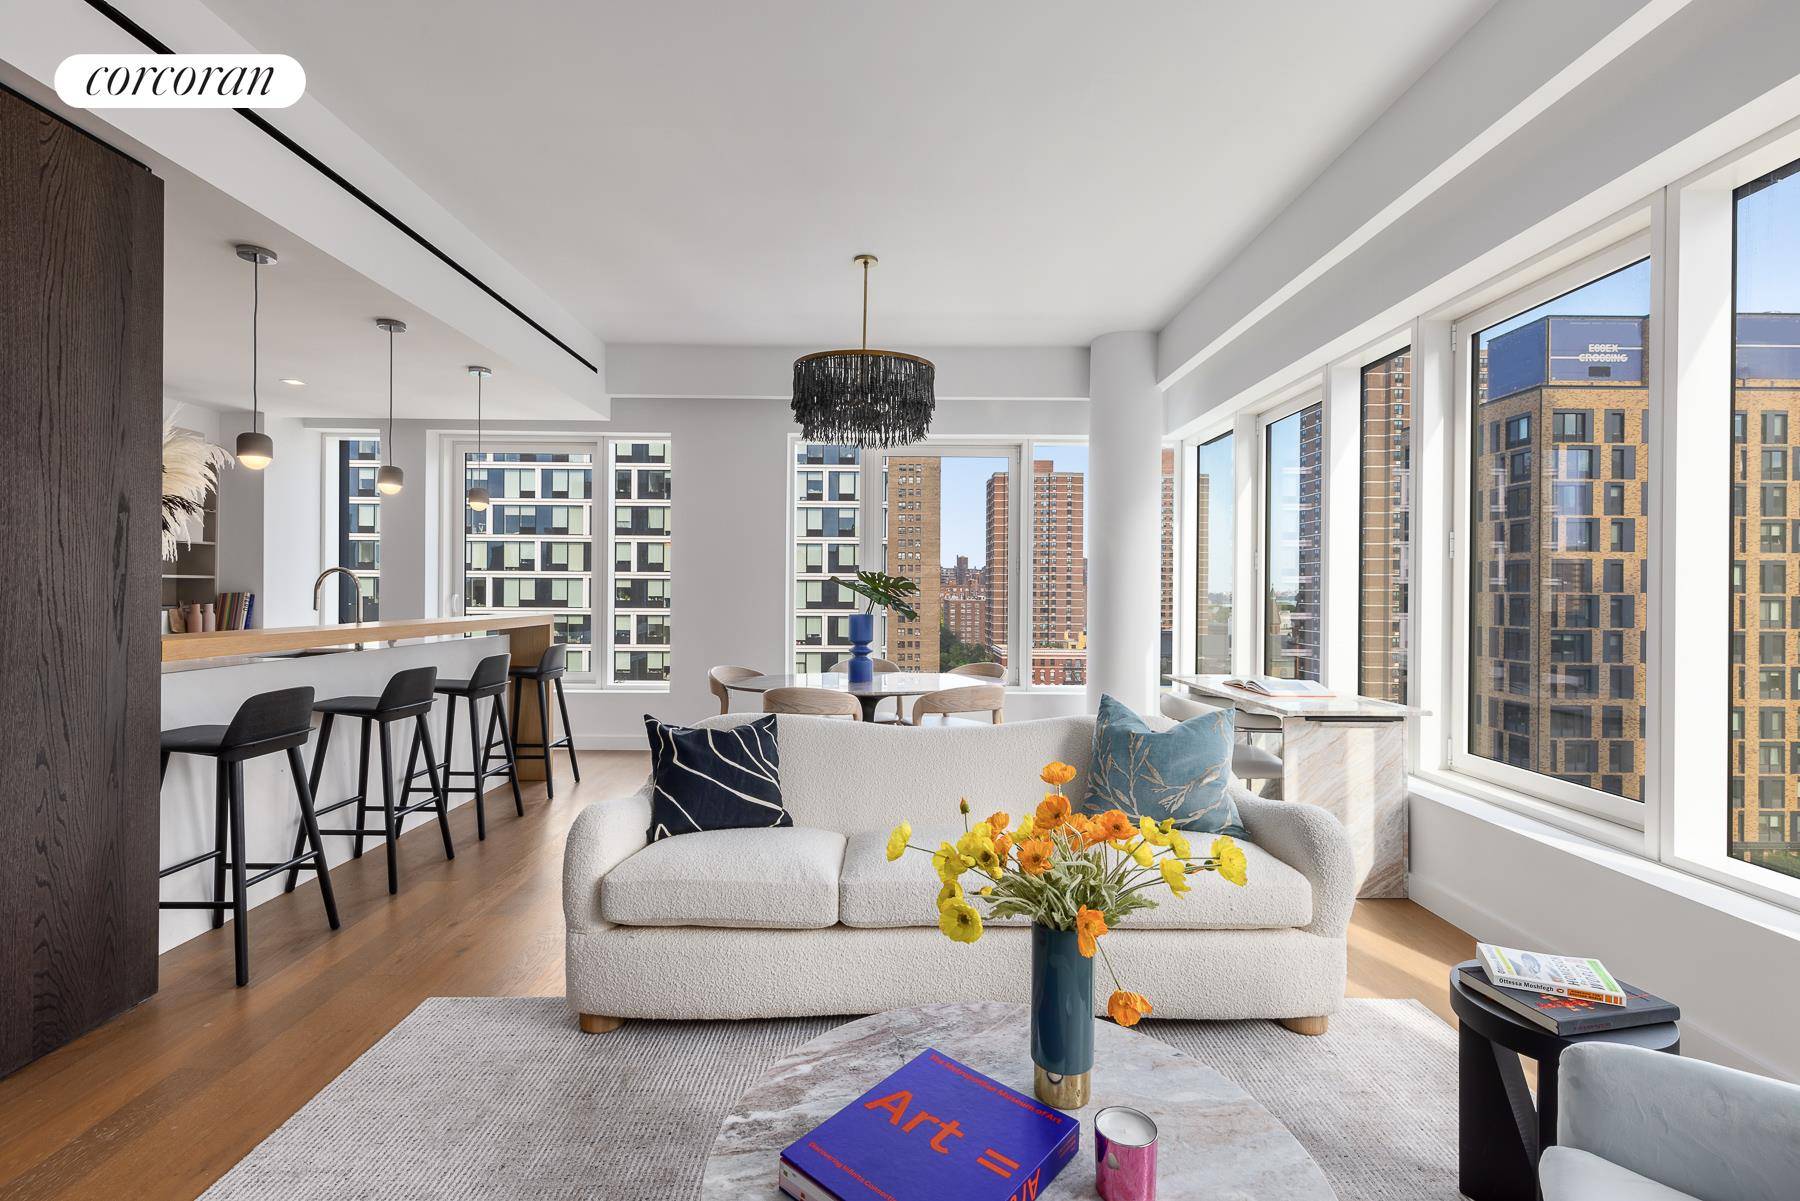 PRICE IMPROVEMENT FINAL OPPORTUNITIES ASK US ABOUT PURCHASER INCENTIVES Sitting at the heart of this authentic and historic New York neighborhood One Essex Crossing is the premier residential offering of ...